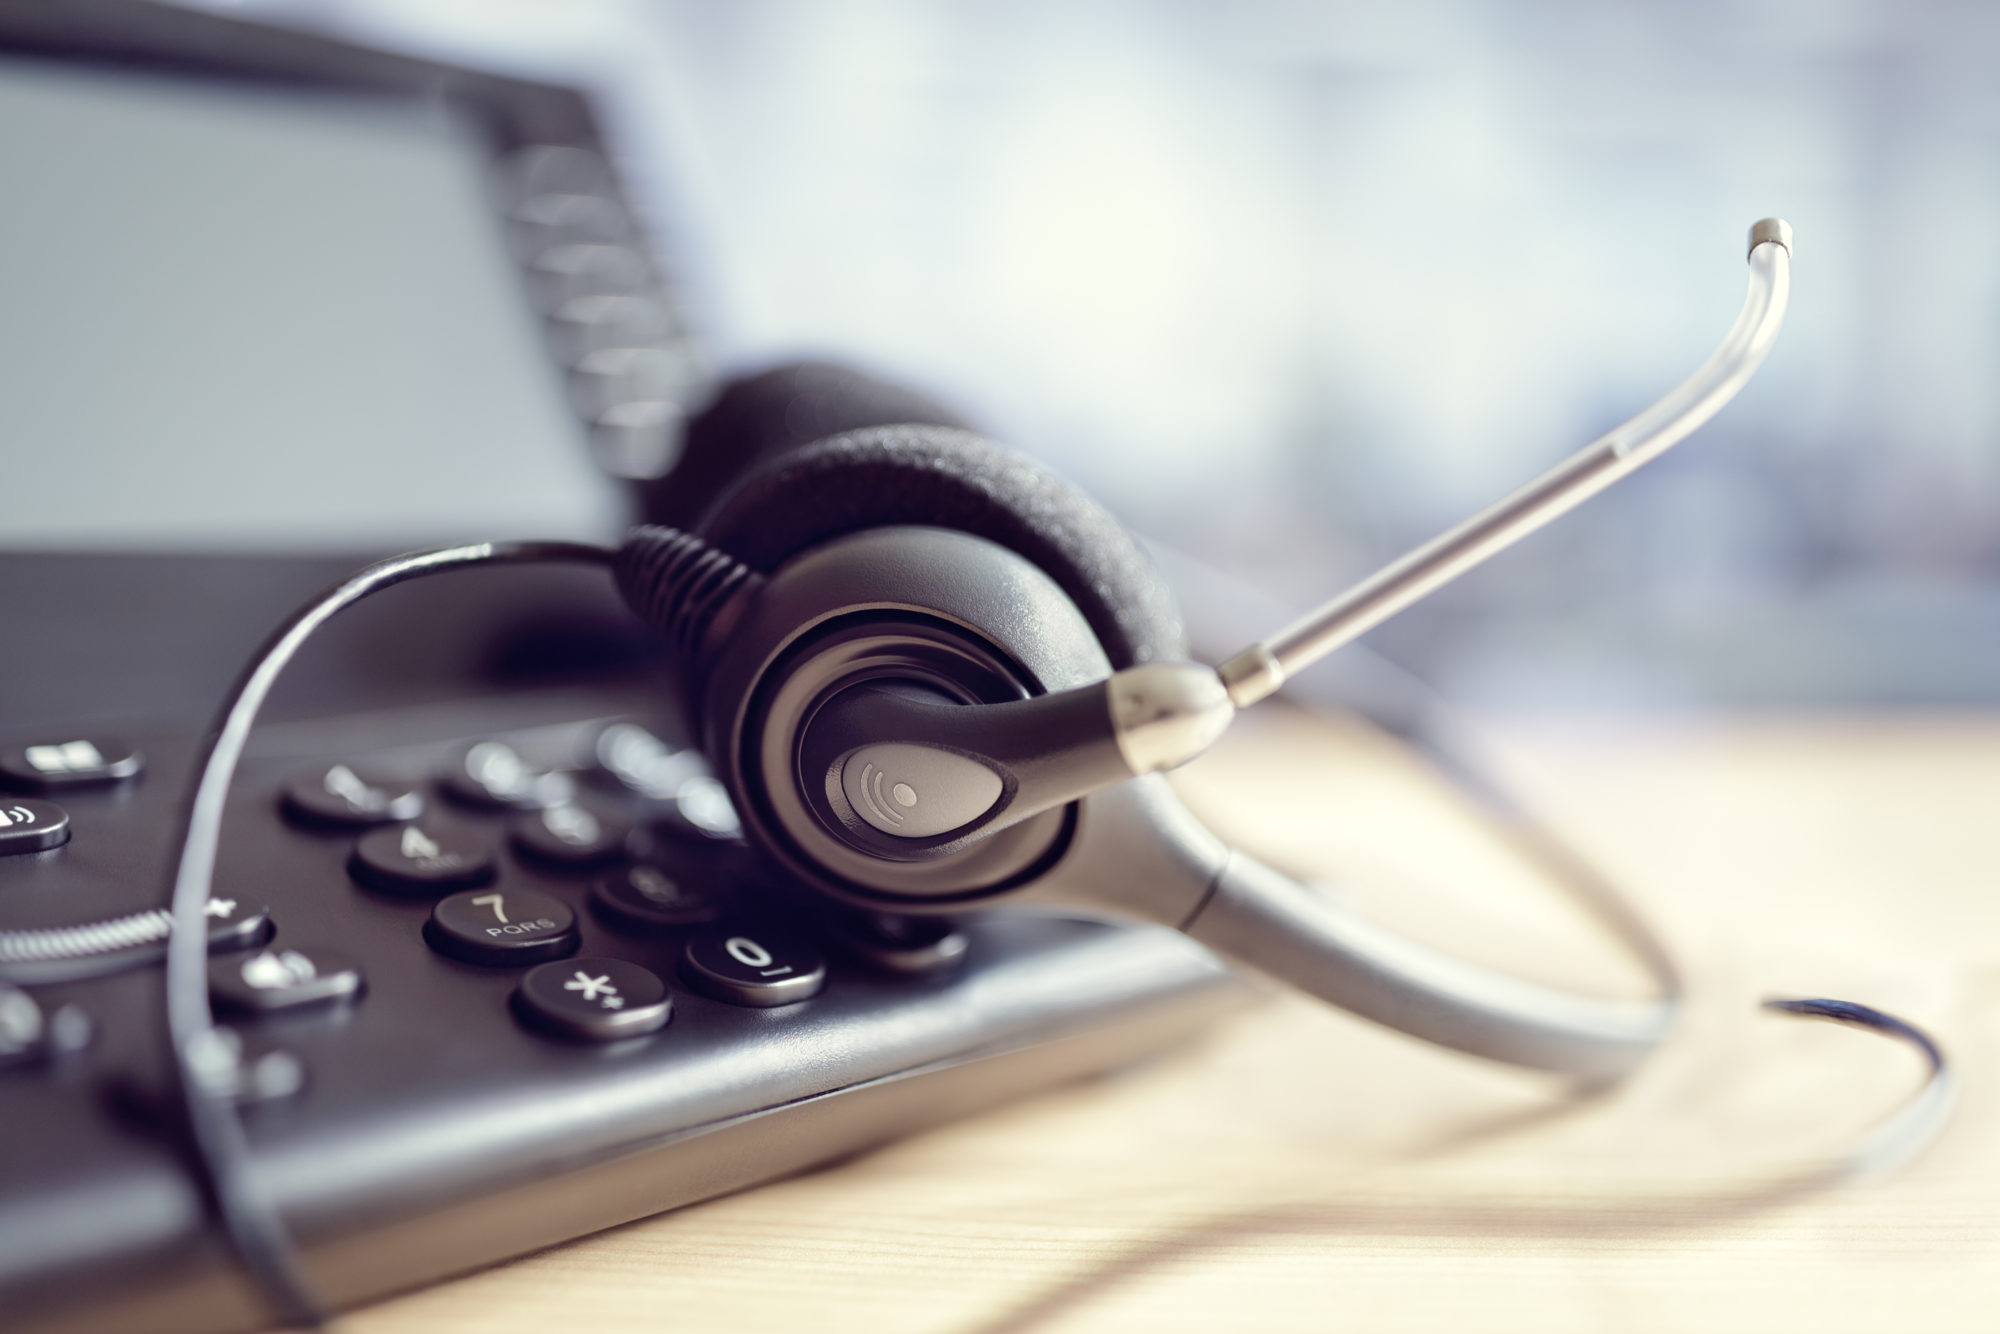 What Are the Benefits of Moving to a VoIP Phone System?